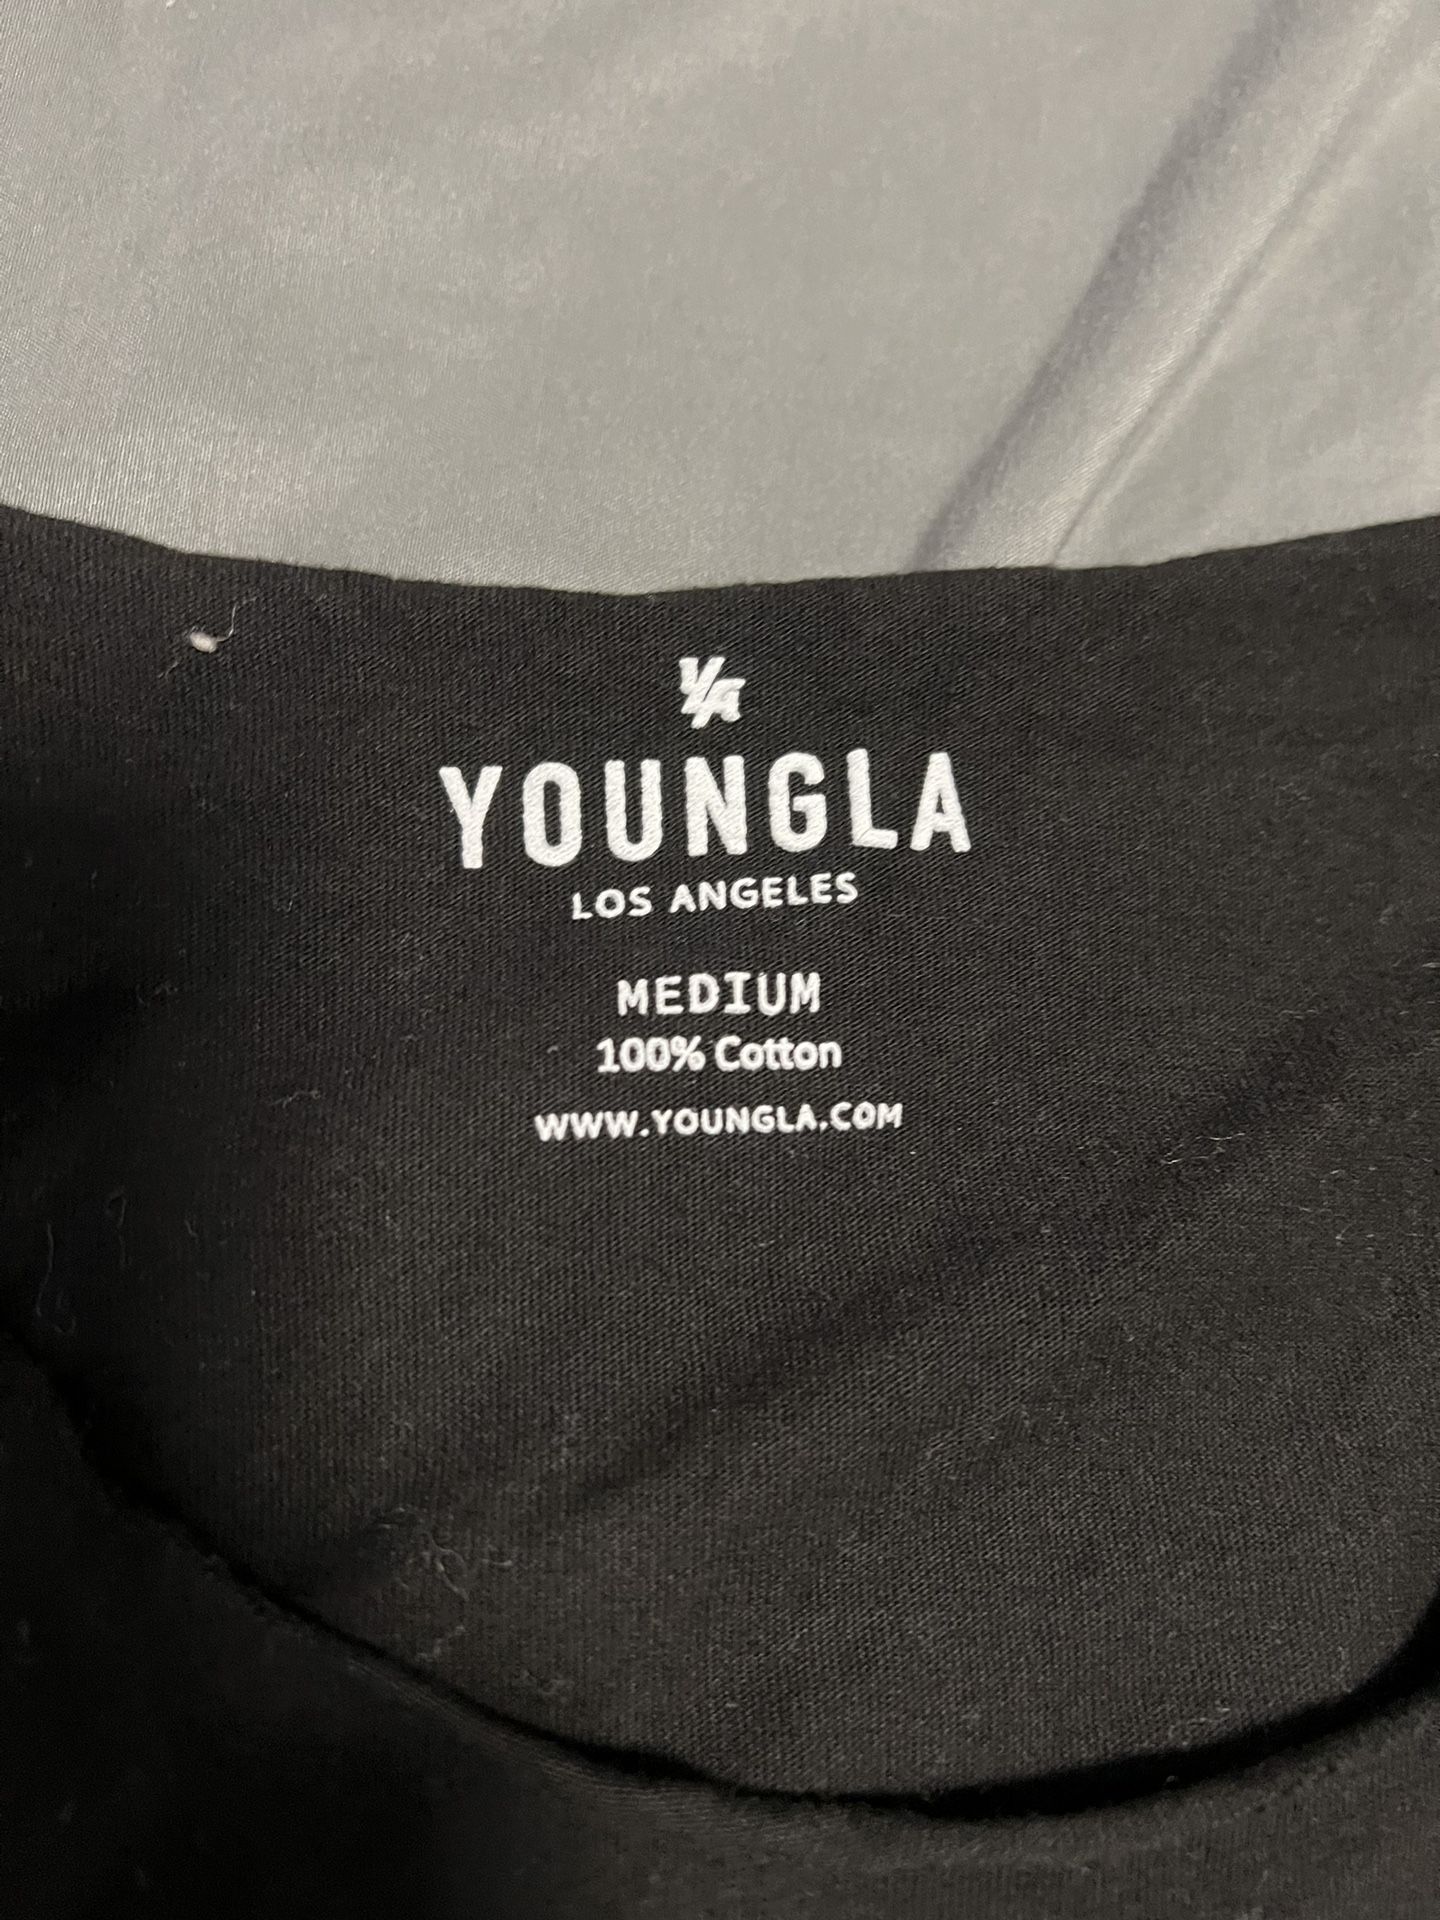 Young LA Jerdani Tee for Sale in Chino Hills, CA - OfferUp